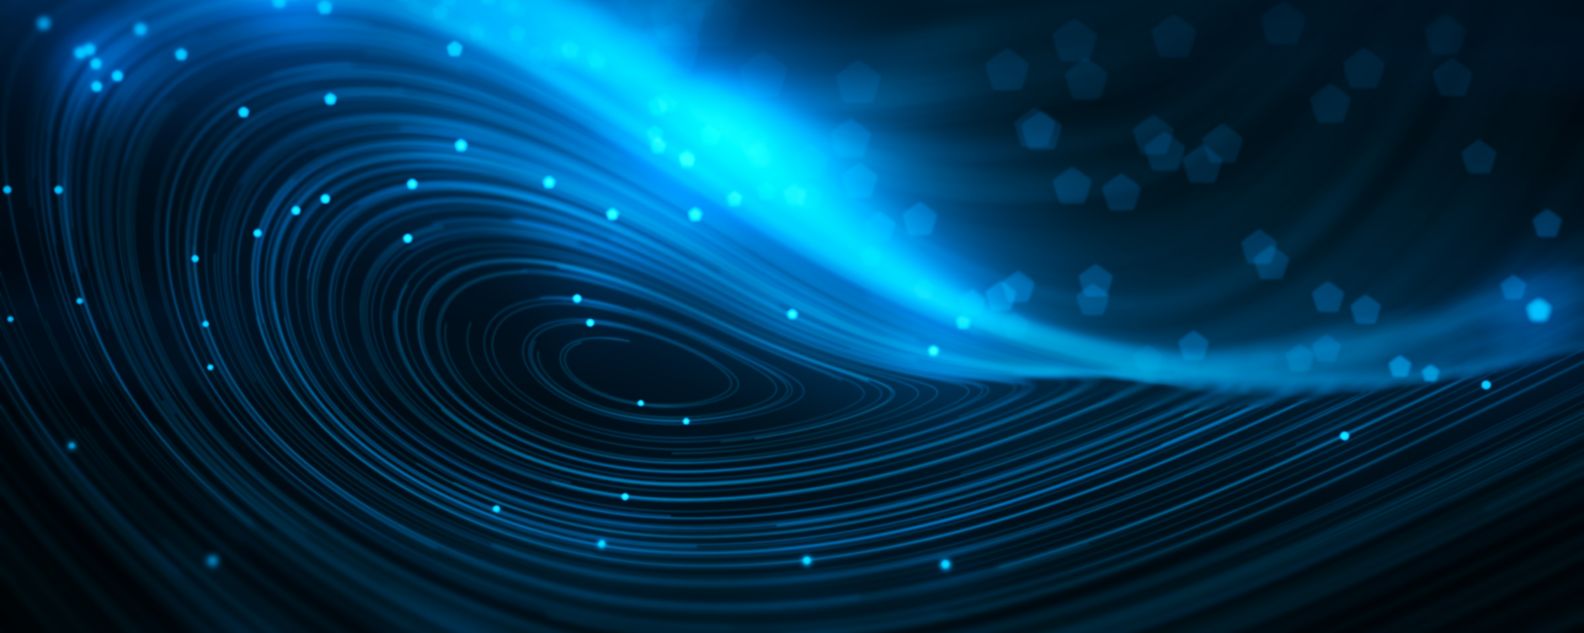 Abstract technology motion background with blue lines and glowing points (data) moving along it 4K loopable background. concepts:  data flow, information